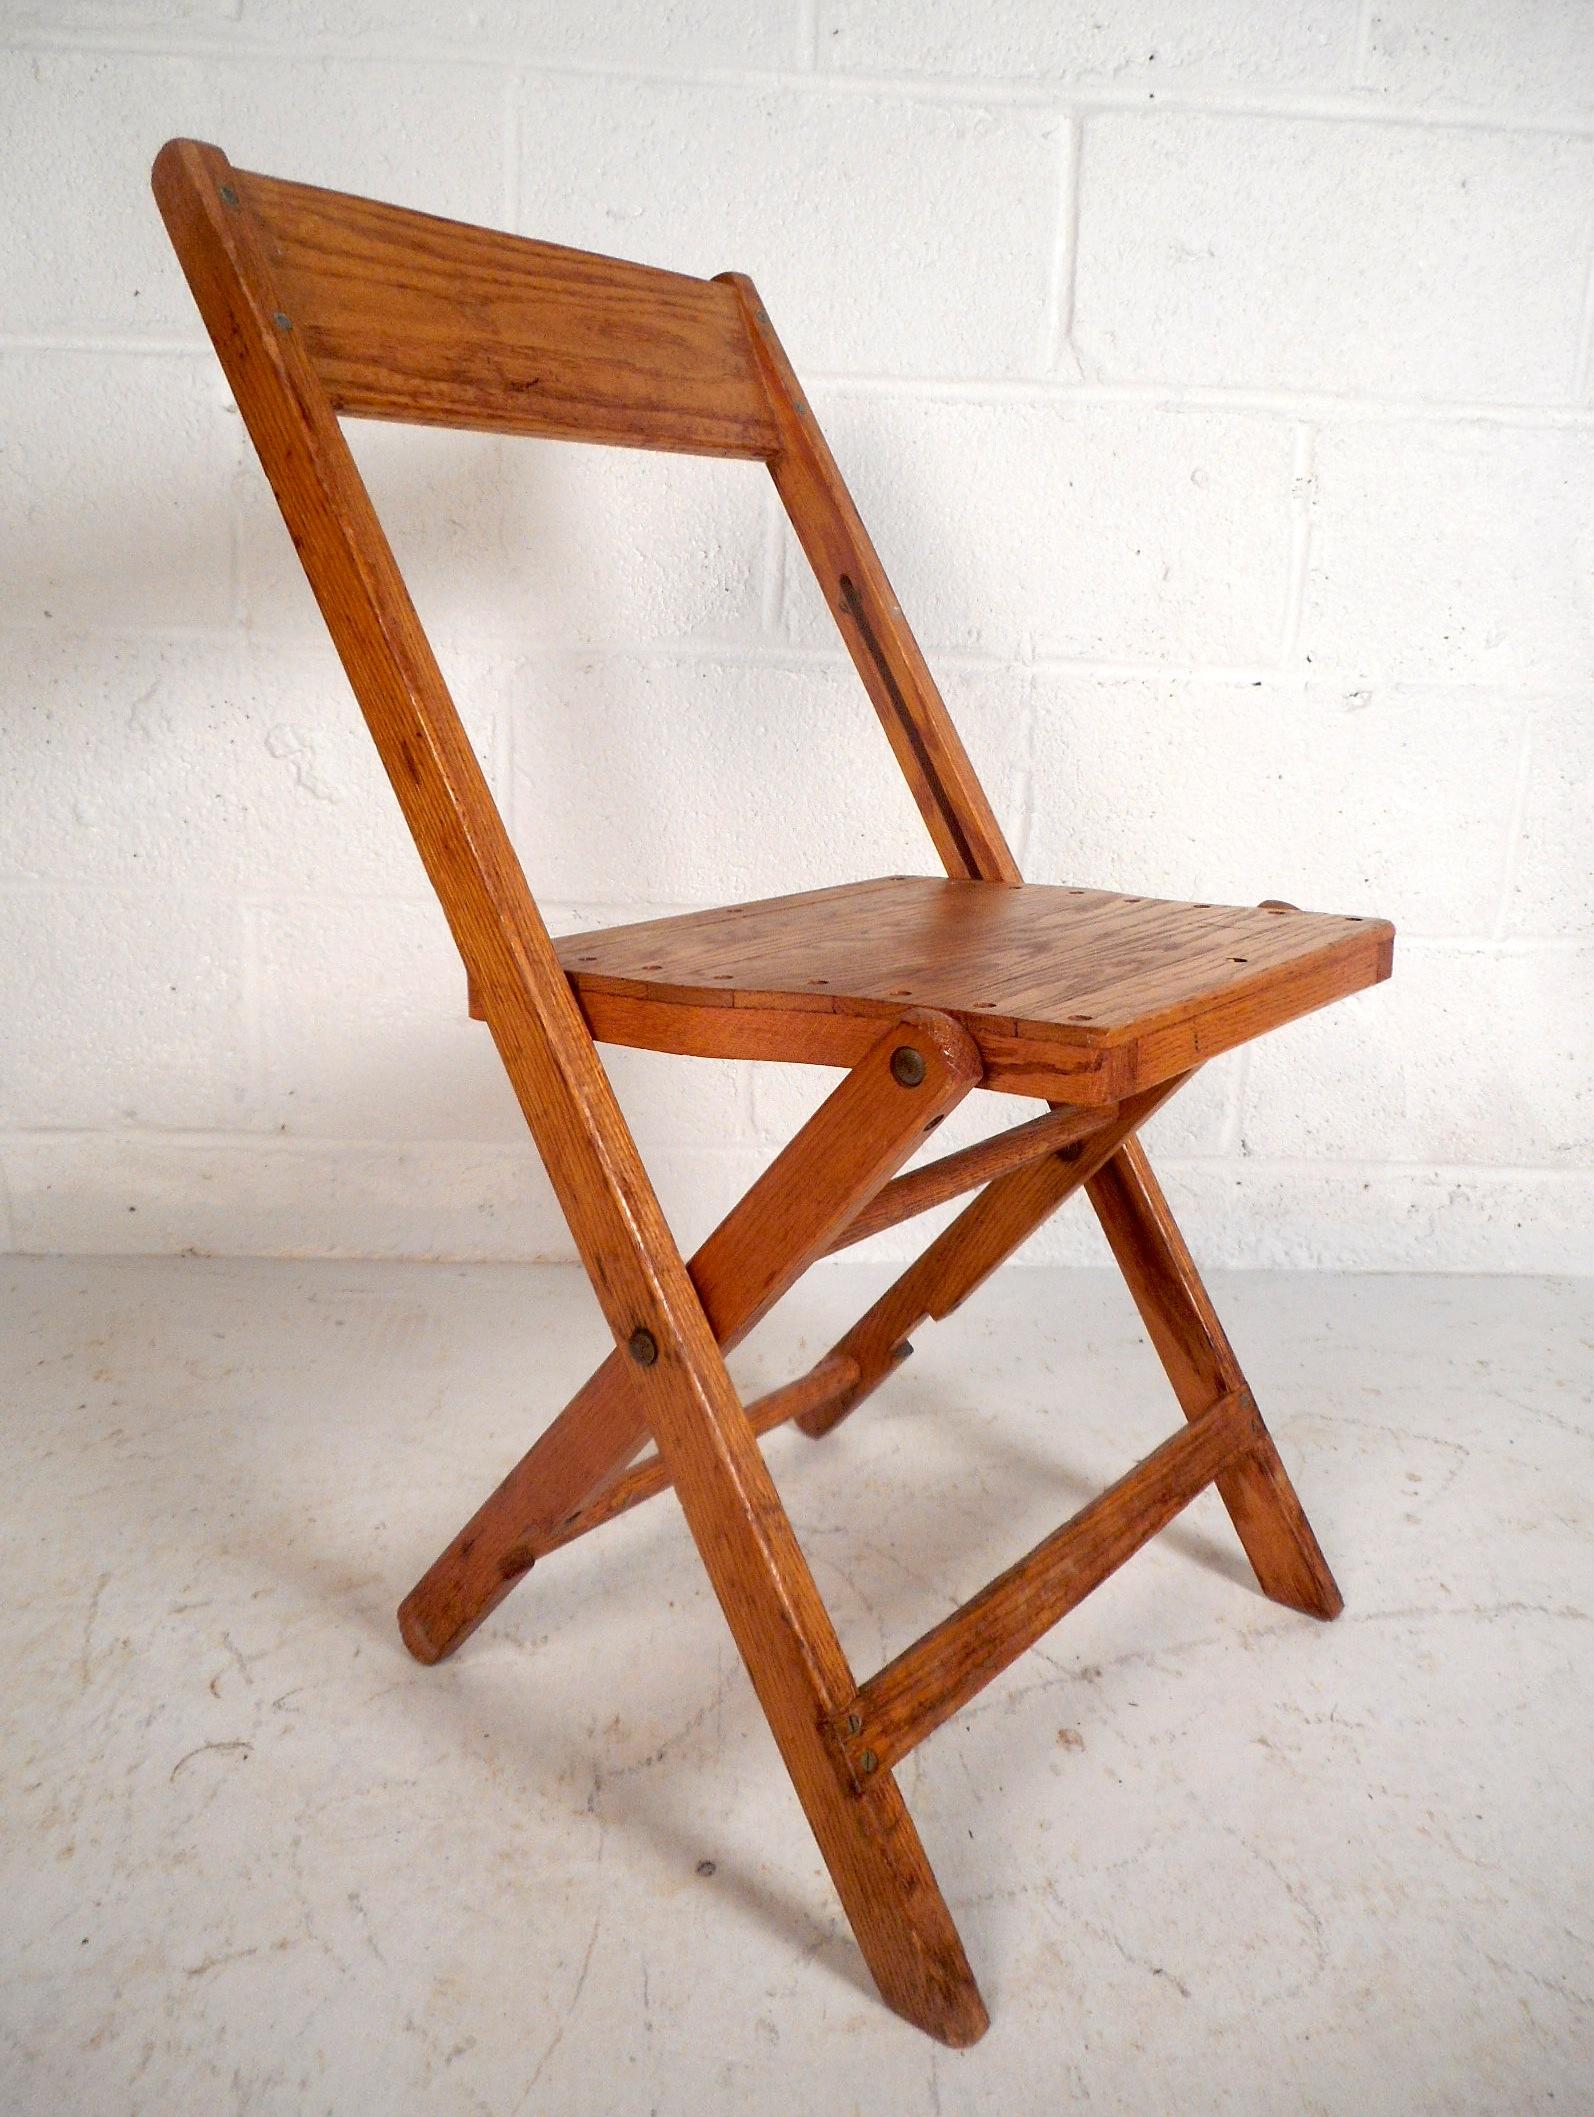 These midcentury folding chairs are perfect for any conference or social gathering. They are quite stylish with their vintage oak finish and slatted seats. The six folding chairs were made in America by Snyder Chair Co. and are very sturdy as a